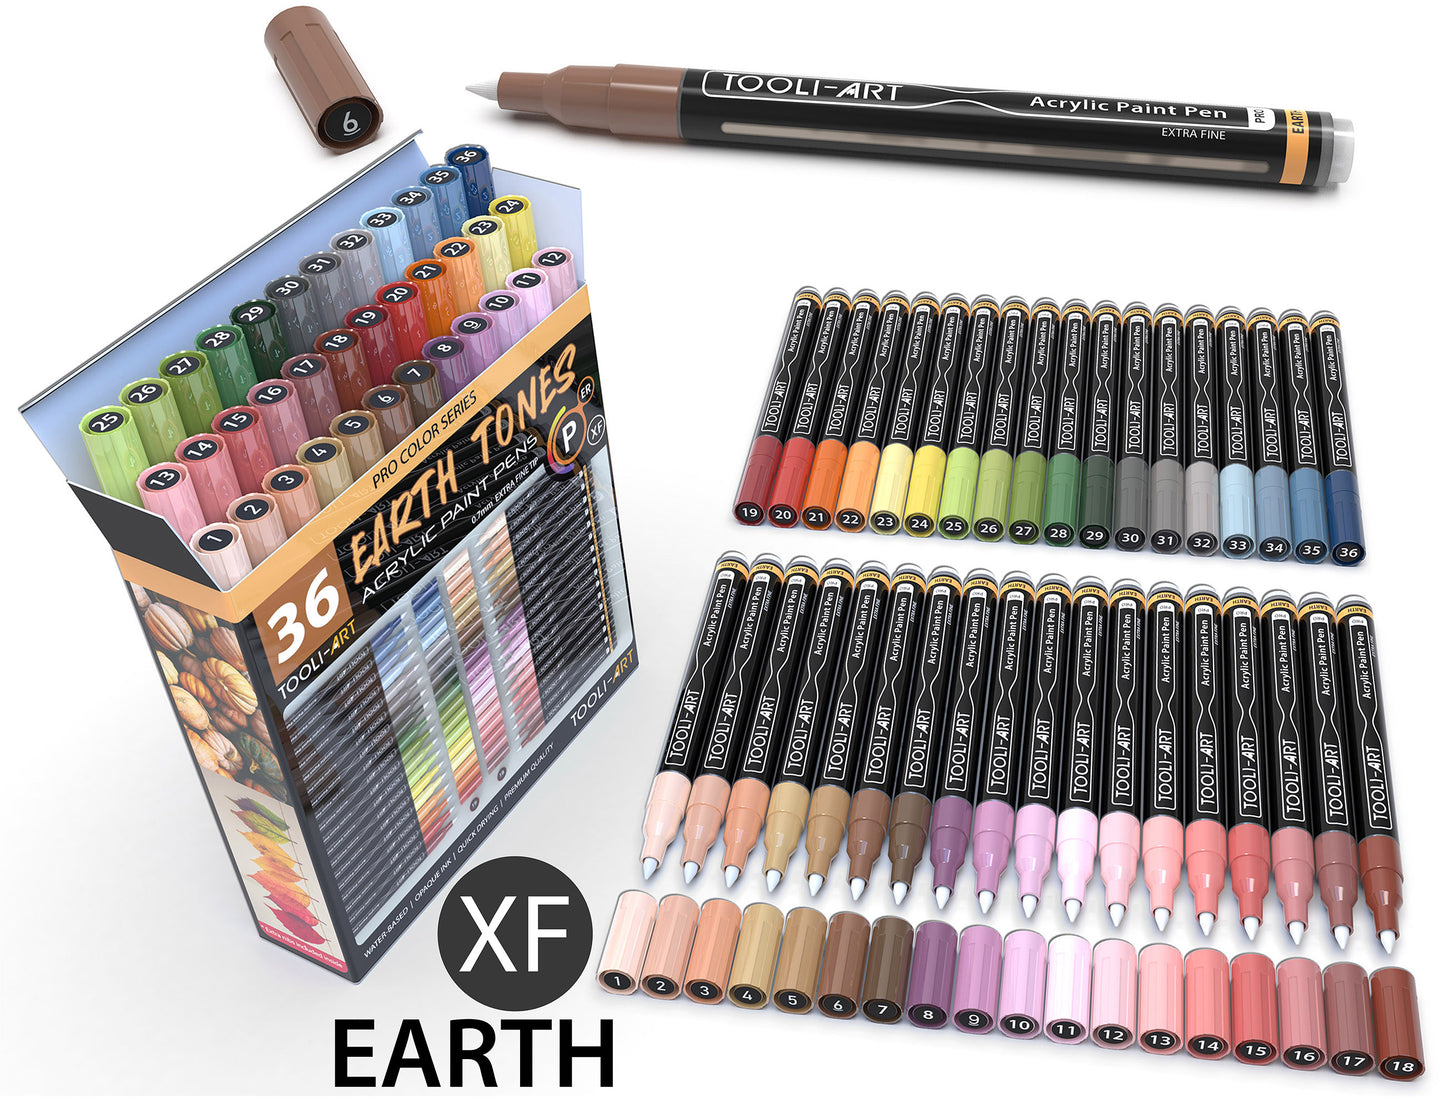 36 Acrylic Paint Pens Skin and Earth Tones (Pro Color Series Marker Set) (0.7mm EXTRA FINE)